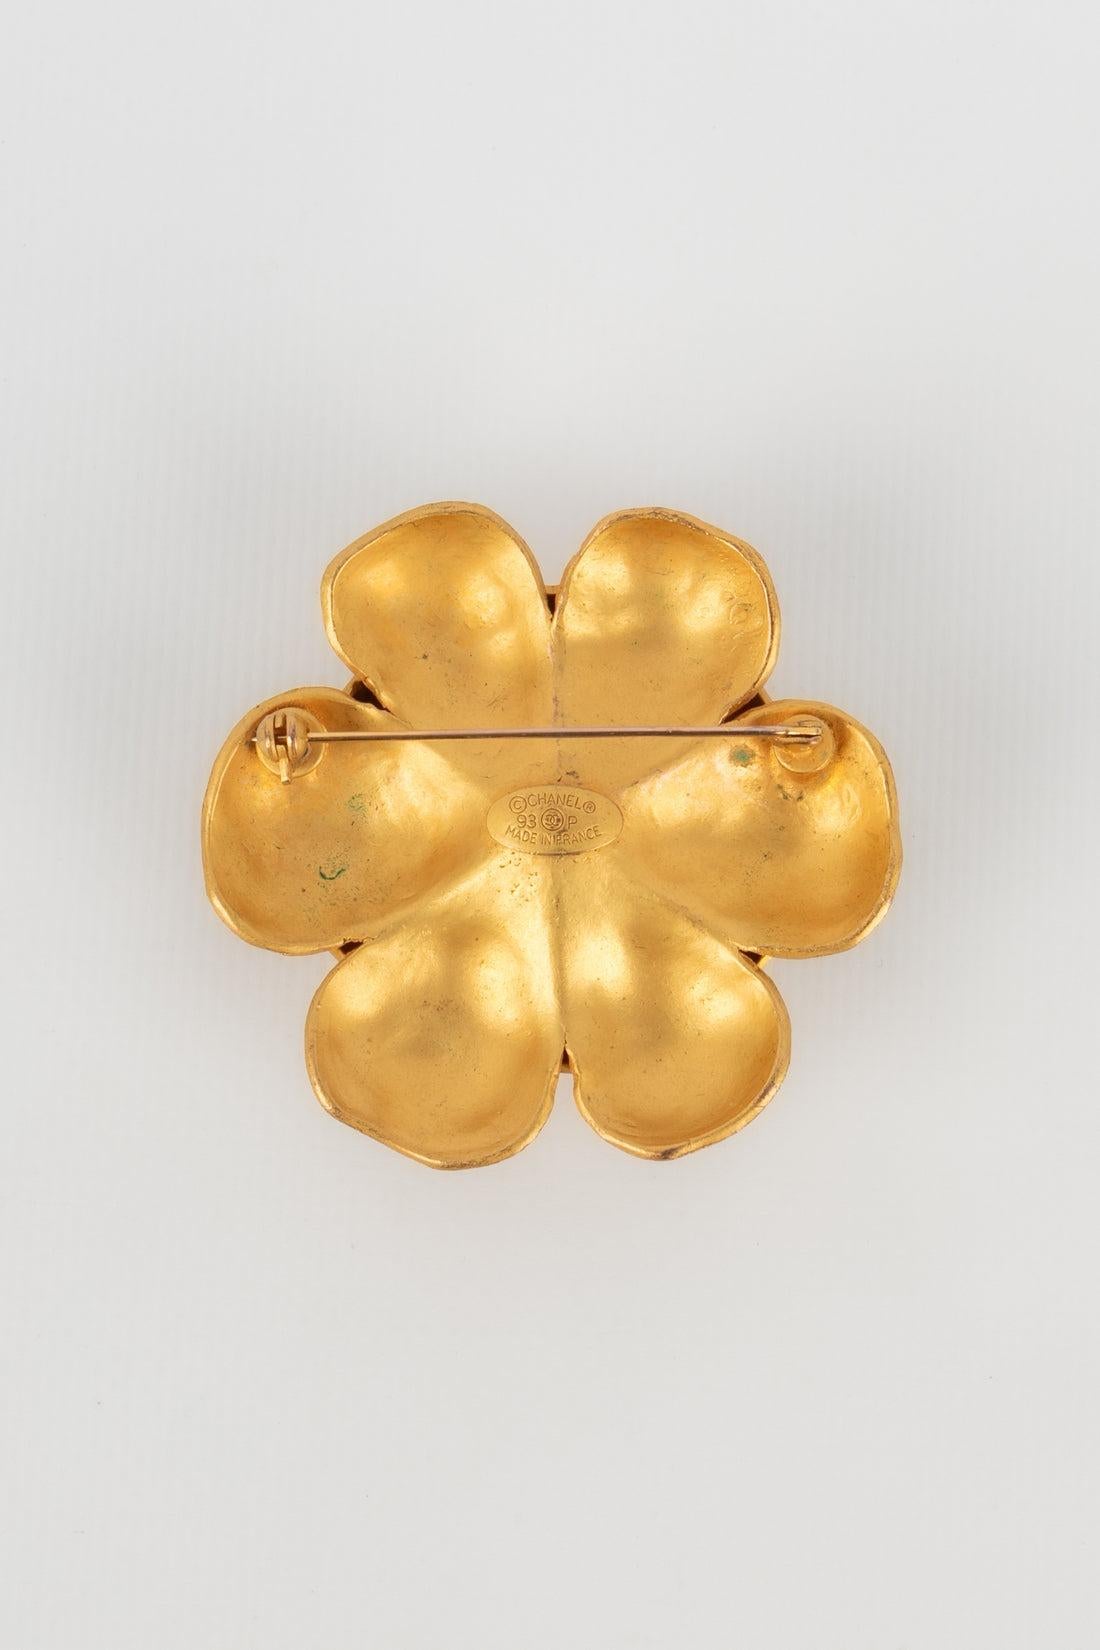 Chanel - (Made in France)Golden metal beaten brooch ornamented with a pearly cabochon. Spring-Summer 1993 Collection.

Additional information:
Condition: Very good condition
Dimensions: Height: 6 cm
Period: 20th Century

Seller Reference: BRB163
